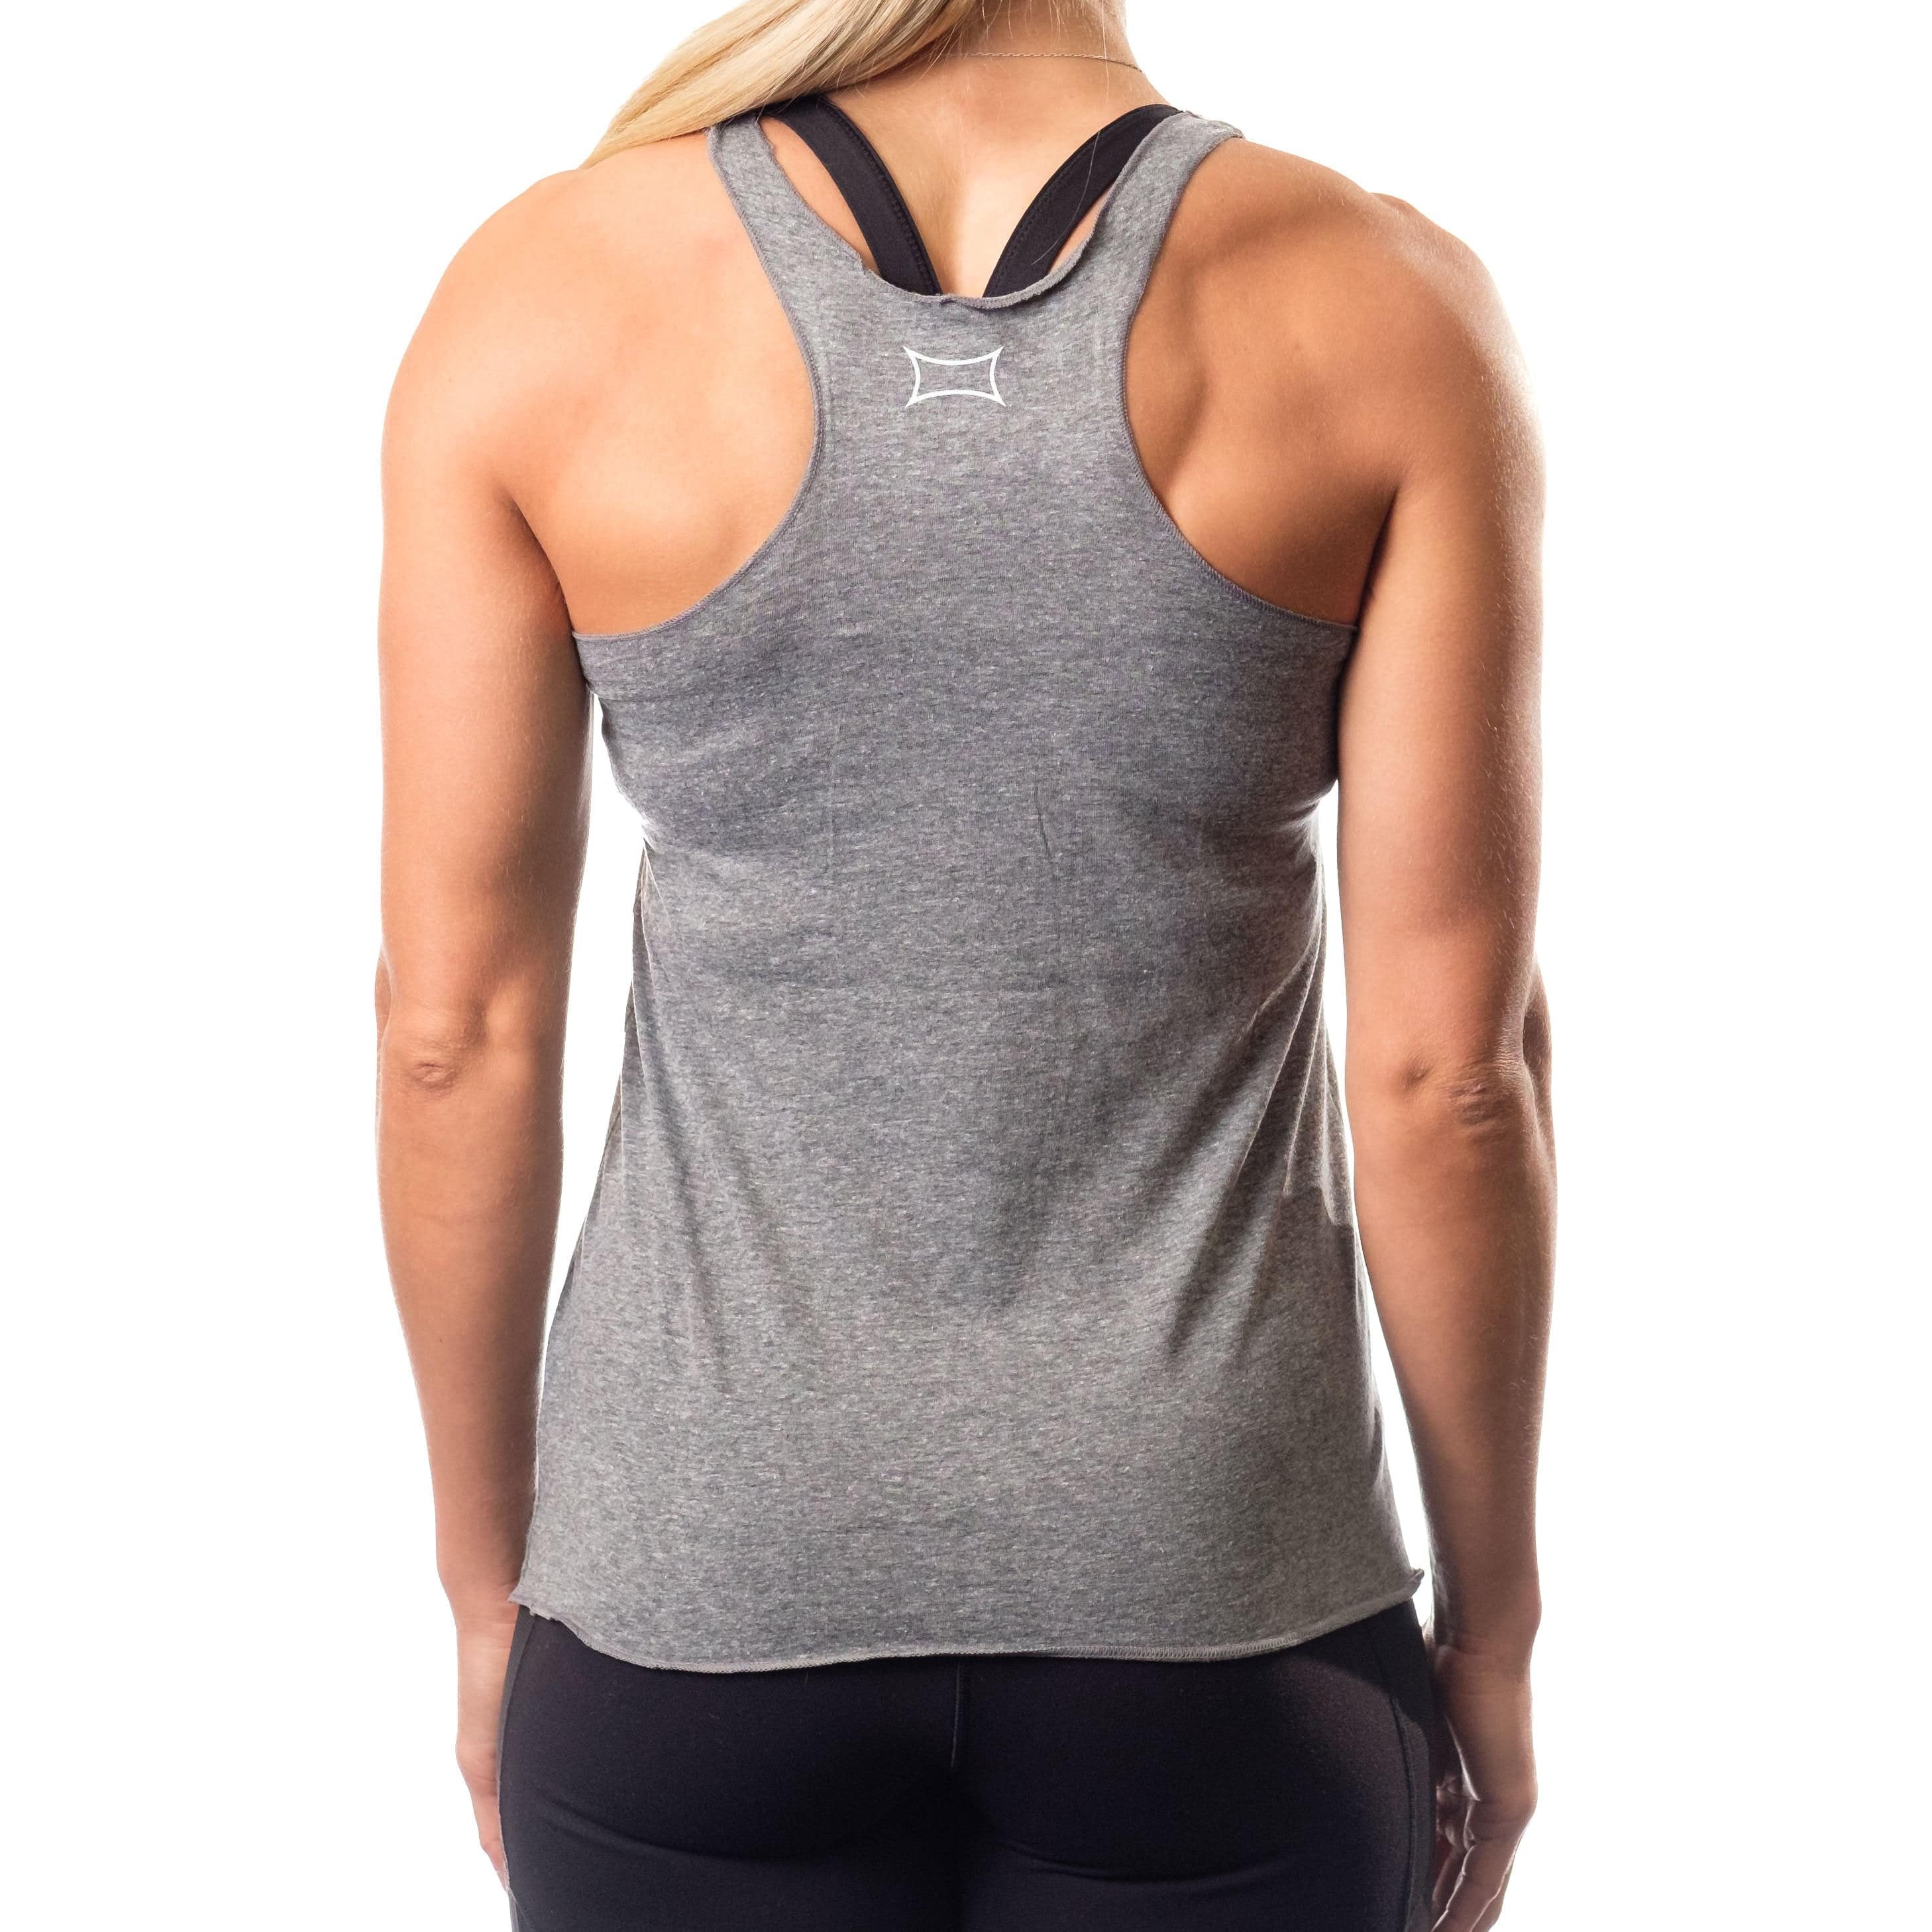 Sling Shot | Women's STrong Tank - Grey - XTC Fitness - Exercise Equipment Superstore - Canada - Tanks